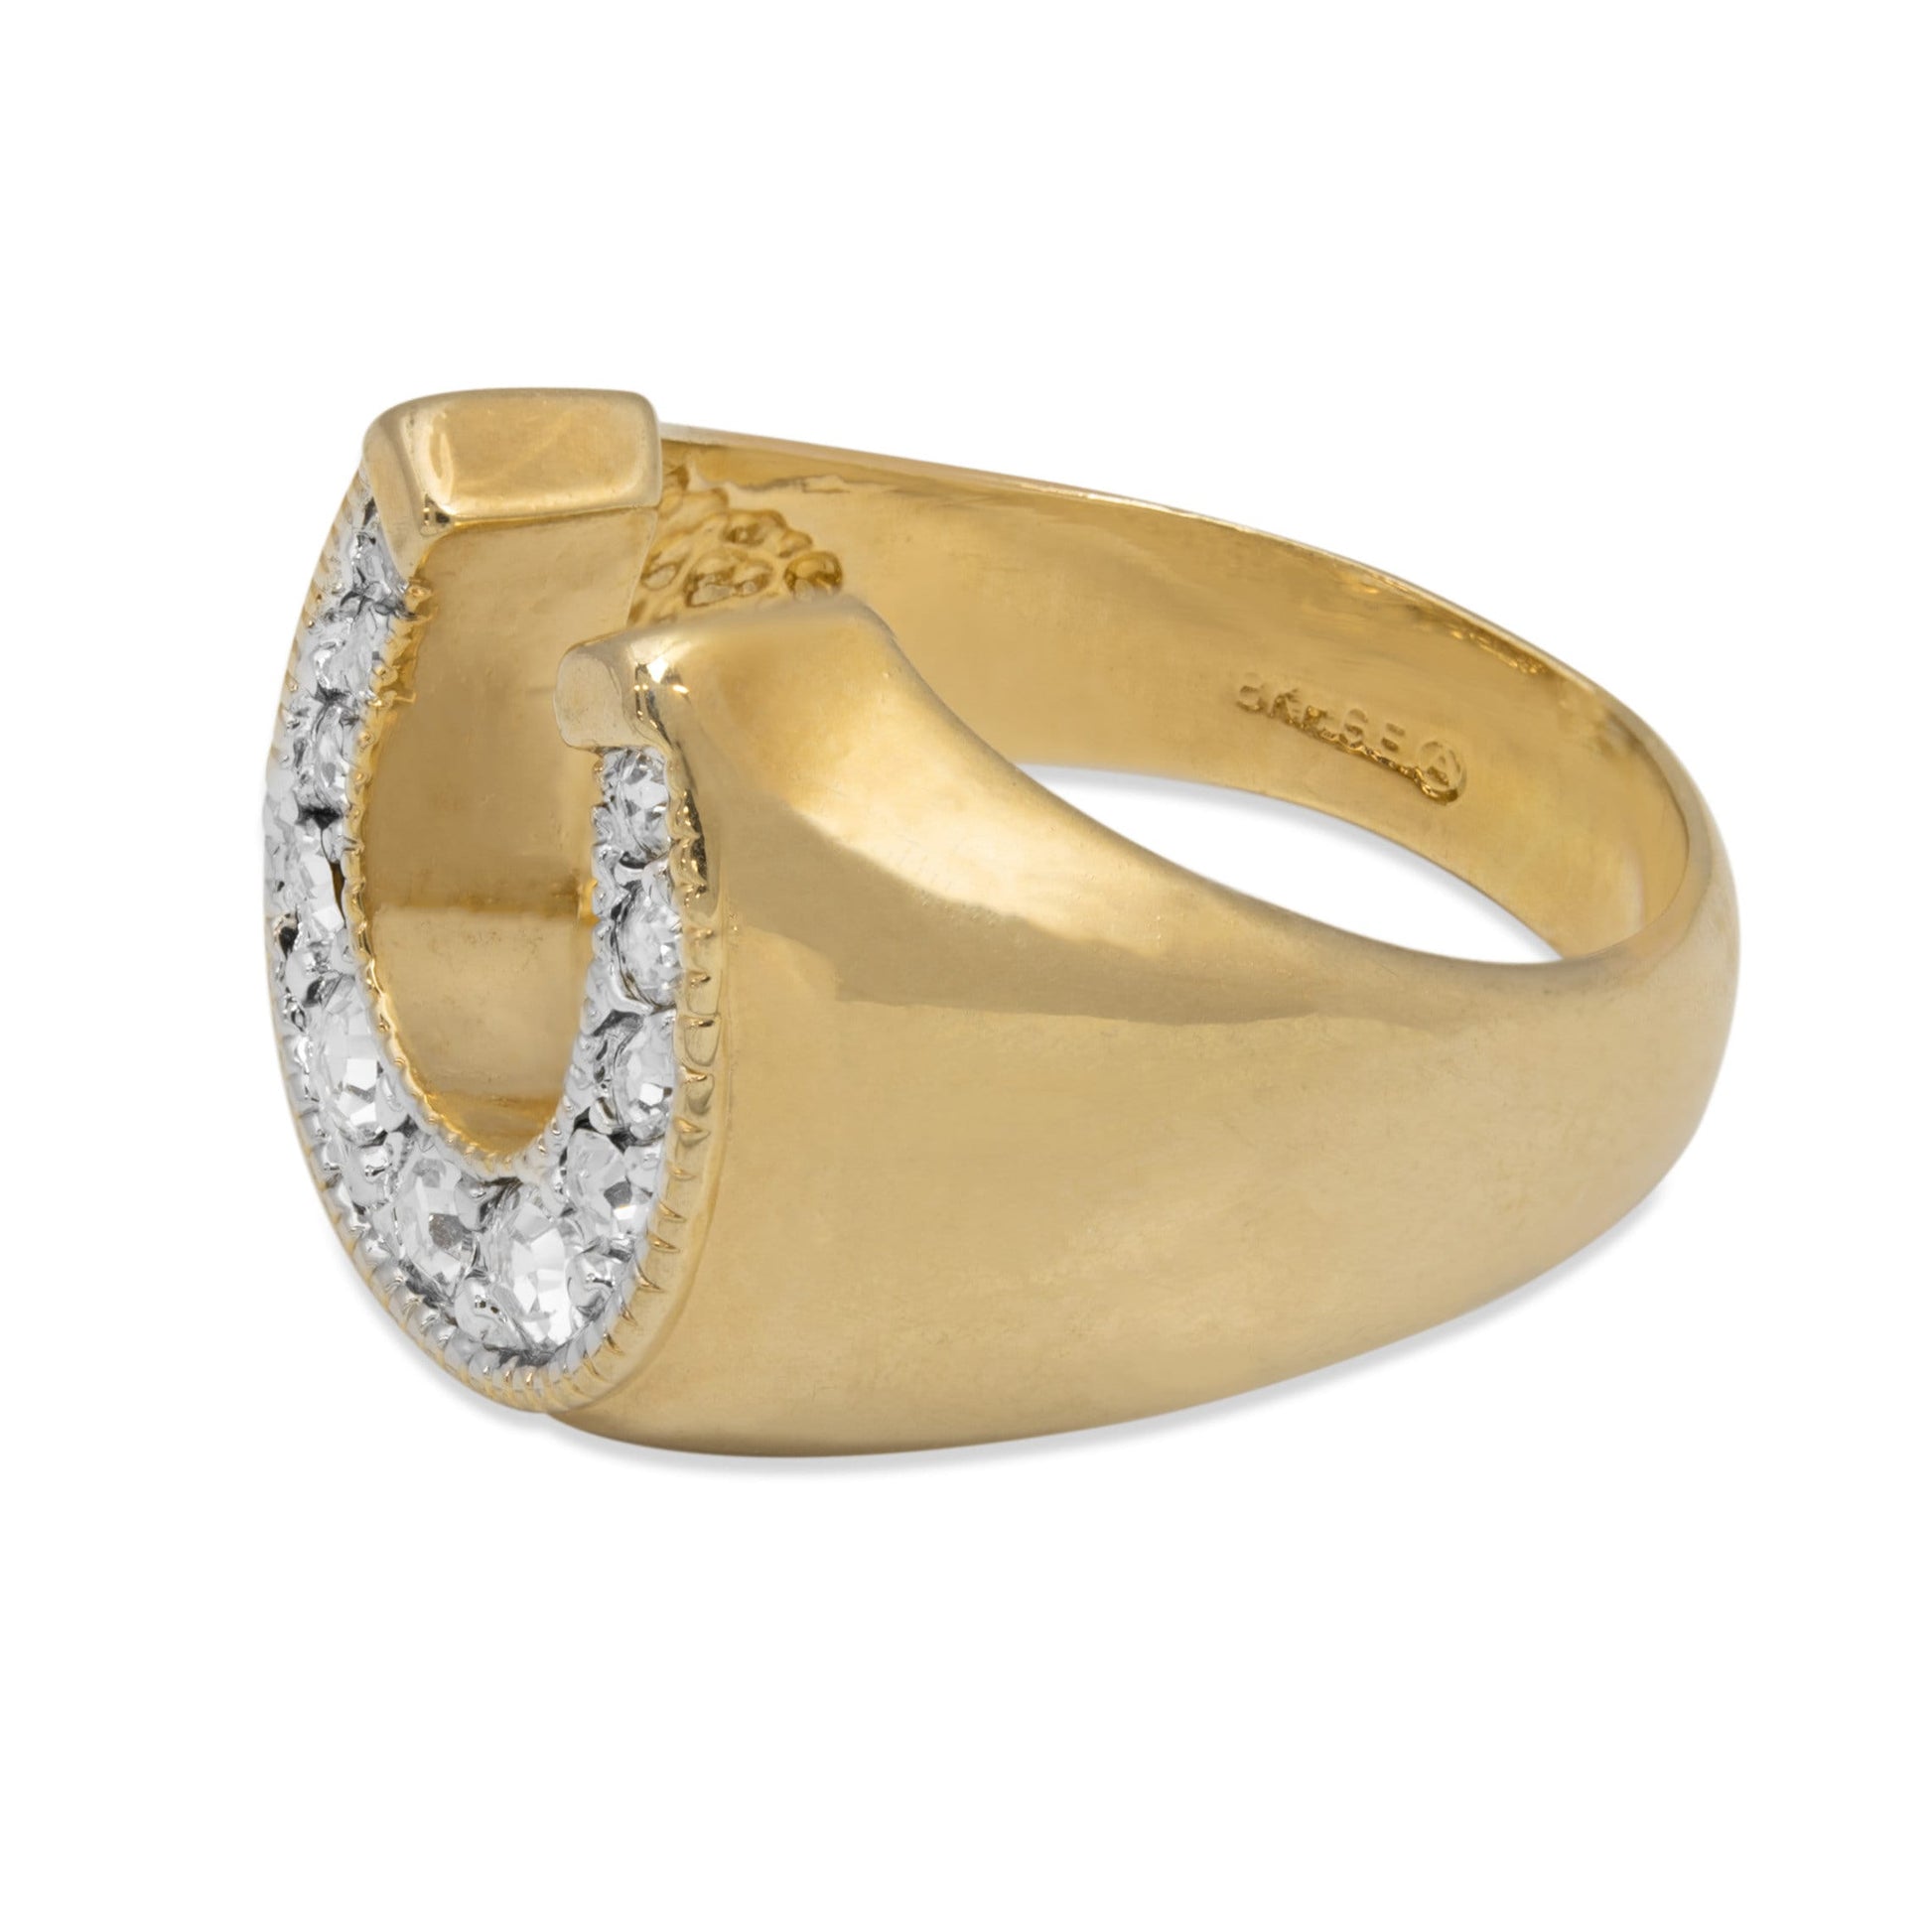 Men's Vintage Ring Equestrian Ring Horseshoe with Austrian Crystals Handcrafted 18k Gold Men Antique Jewelry R6005